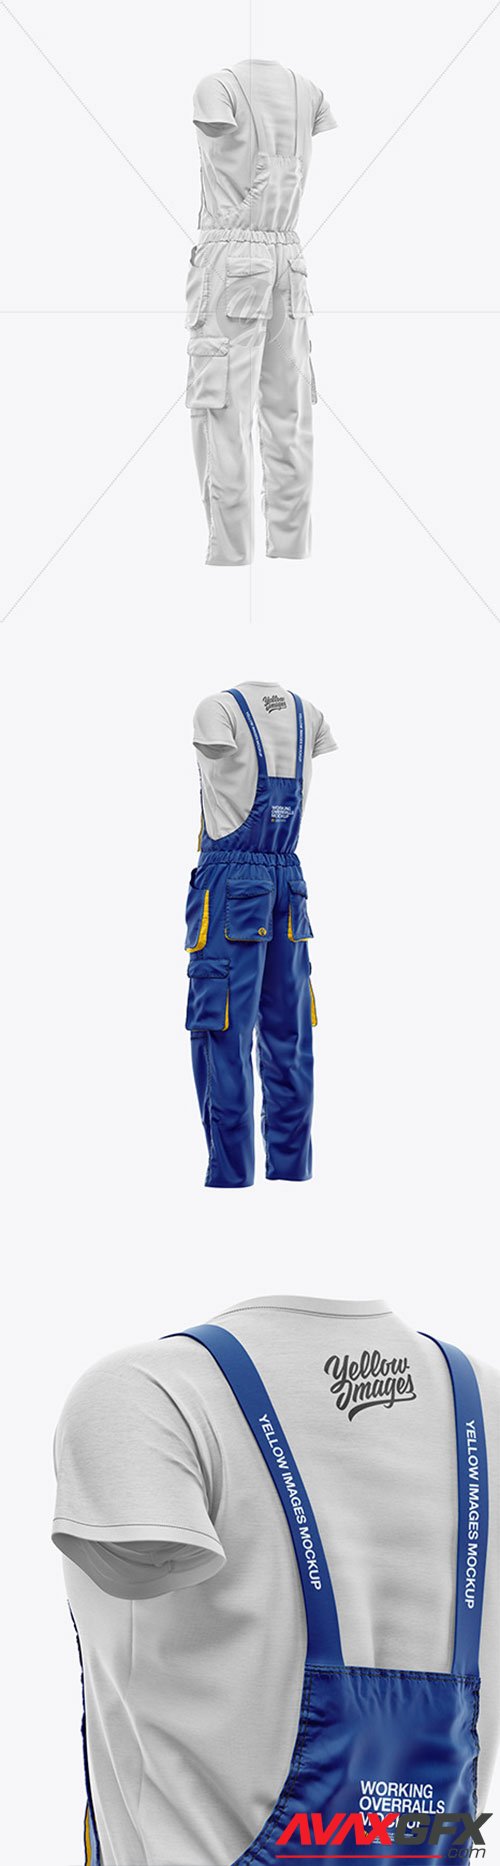 Download Working Overalls Mockup 65367 Avaxgfx All Downloads That You Need In One Place Graphic From Nitroflare Rapidgator